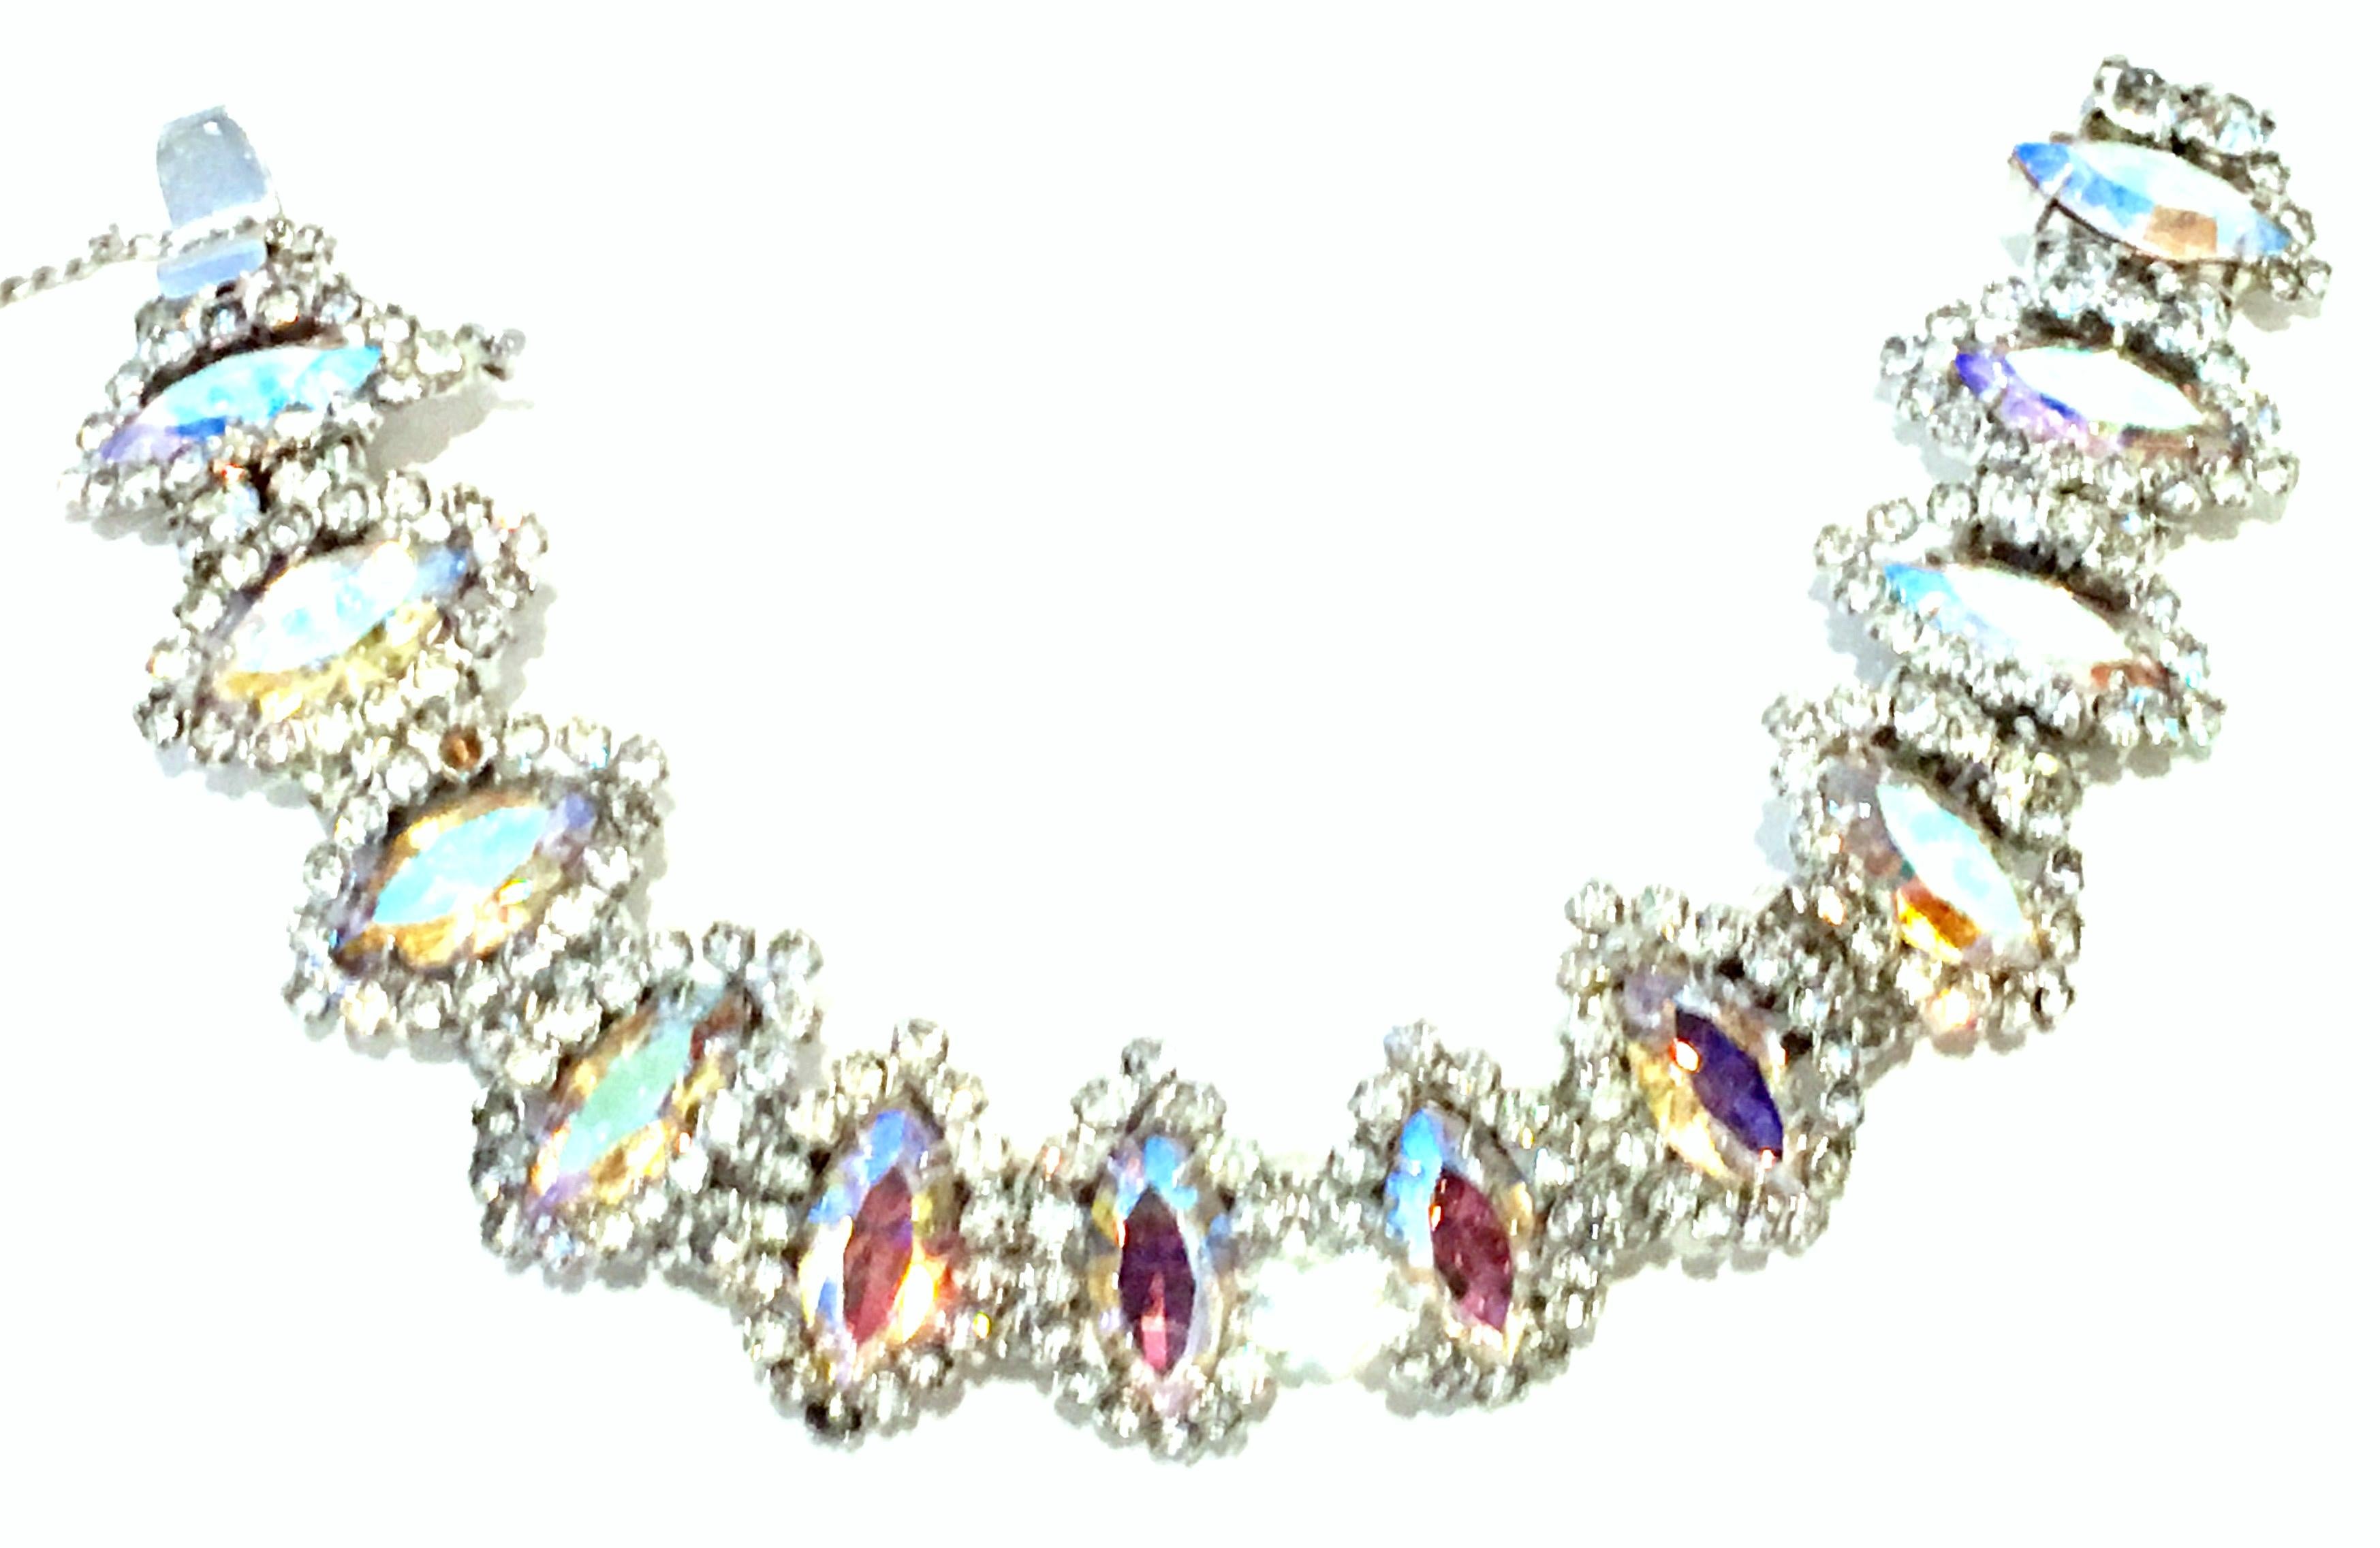 20th Century Silver & Austrian Crystal Link Bracelet By, Weiss. This finely crafted silver rhodium plate link bracelet features twelve dimensional links with fancy prong set 
navette Aurora Borealis stones with applied silver and colorless stones